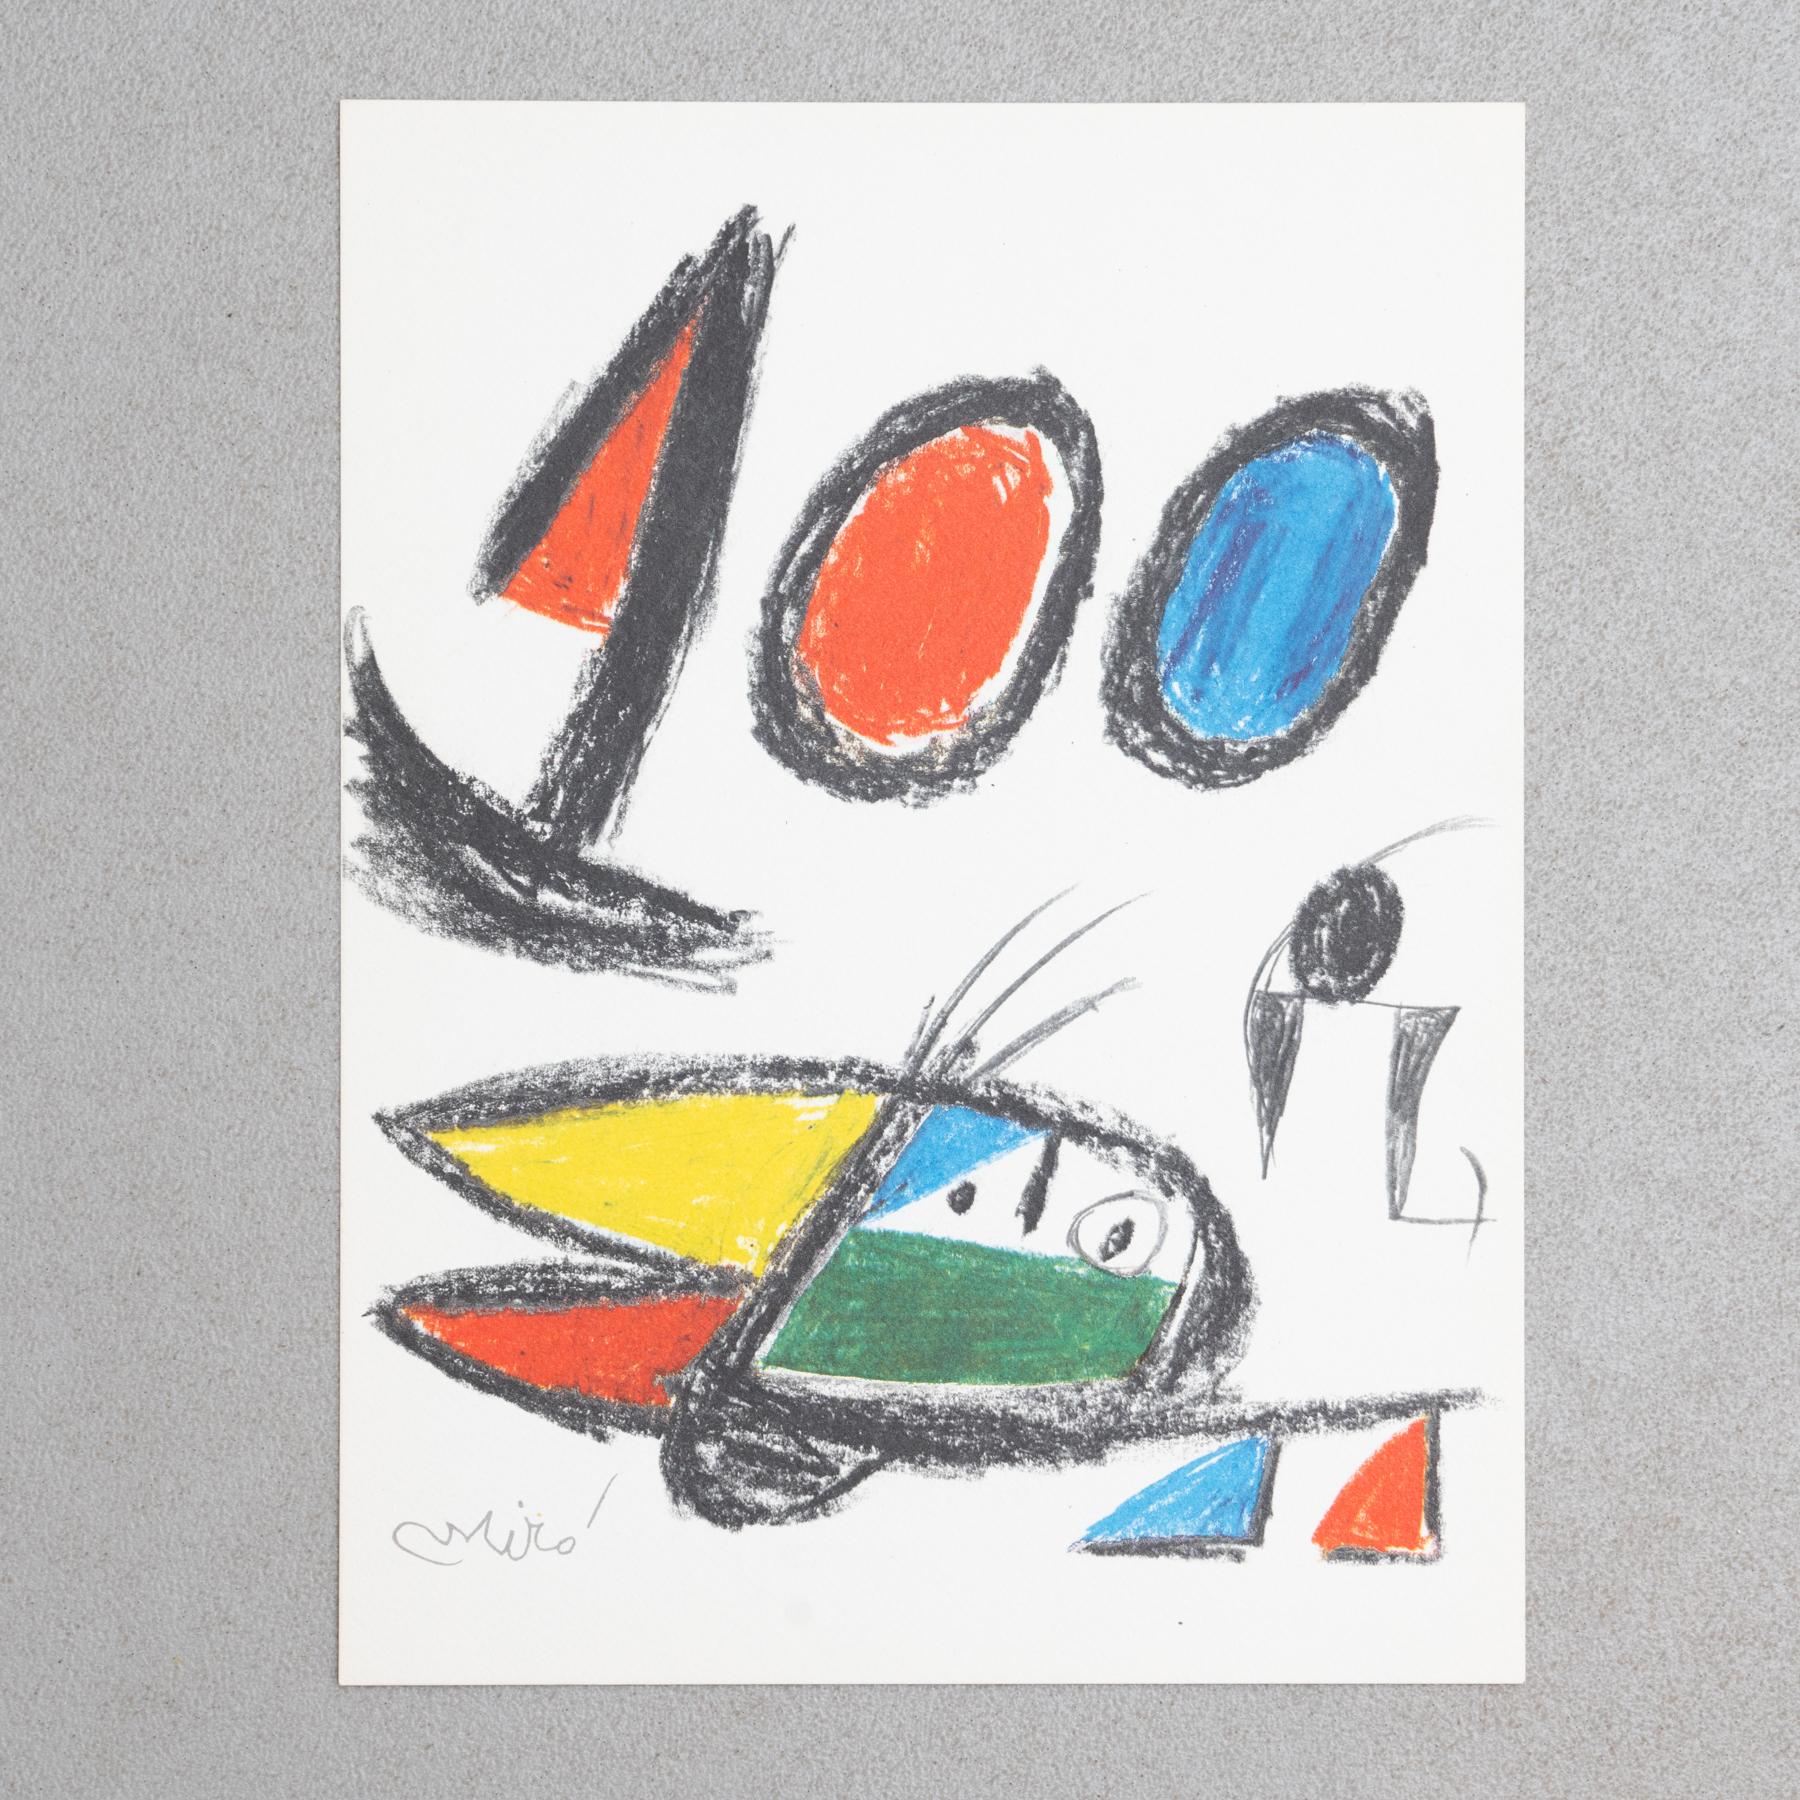 Lithography by Joan Miró, circa 1970.

Stamped rotogravure reproduction of series by Bolaffiarte. Limited edition of 5000.

Unframed.

Signed by the artist.

In good original condition.

Joan Miró i Ferrà (20 April 1893 – 25 December 1983)